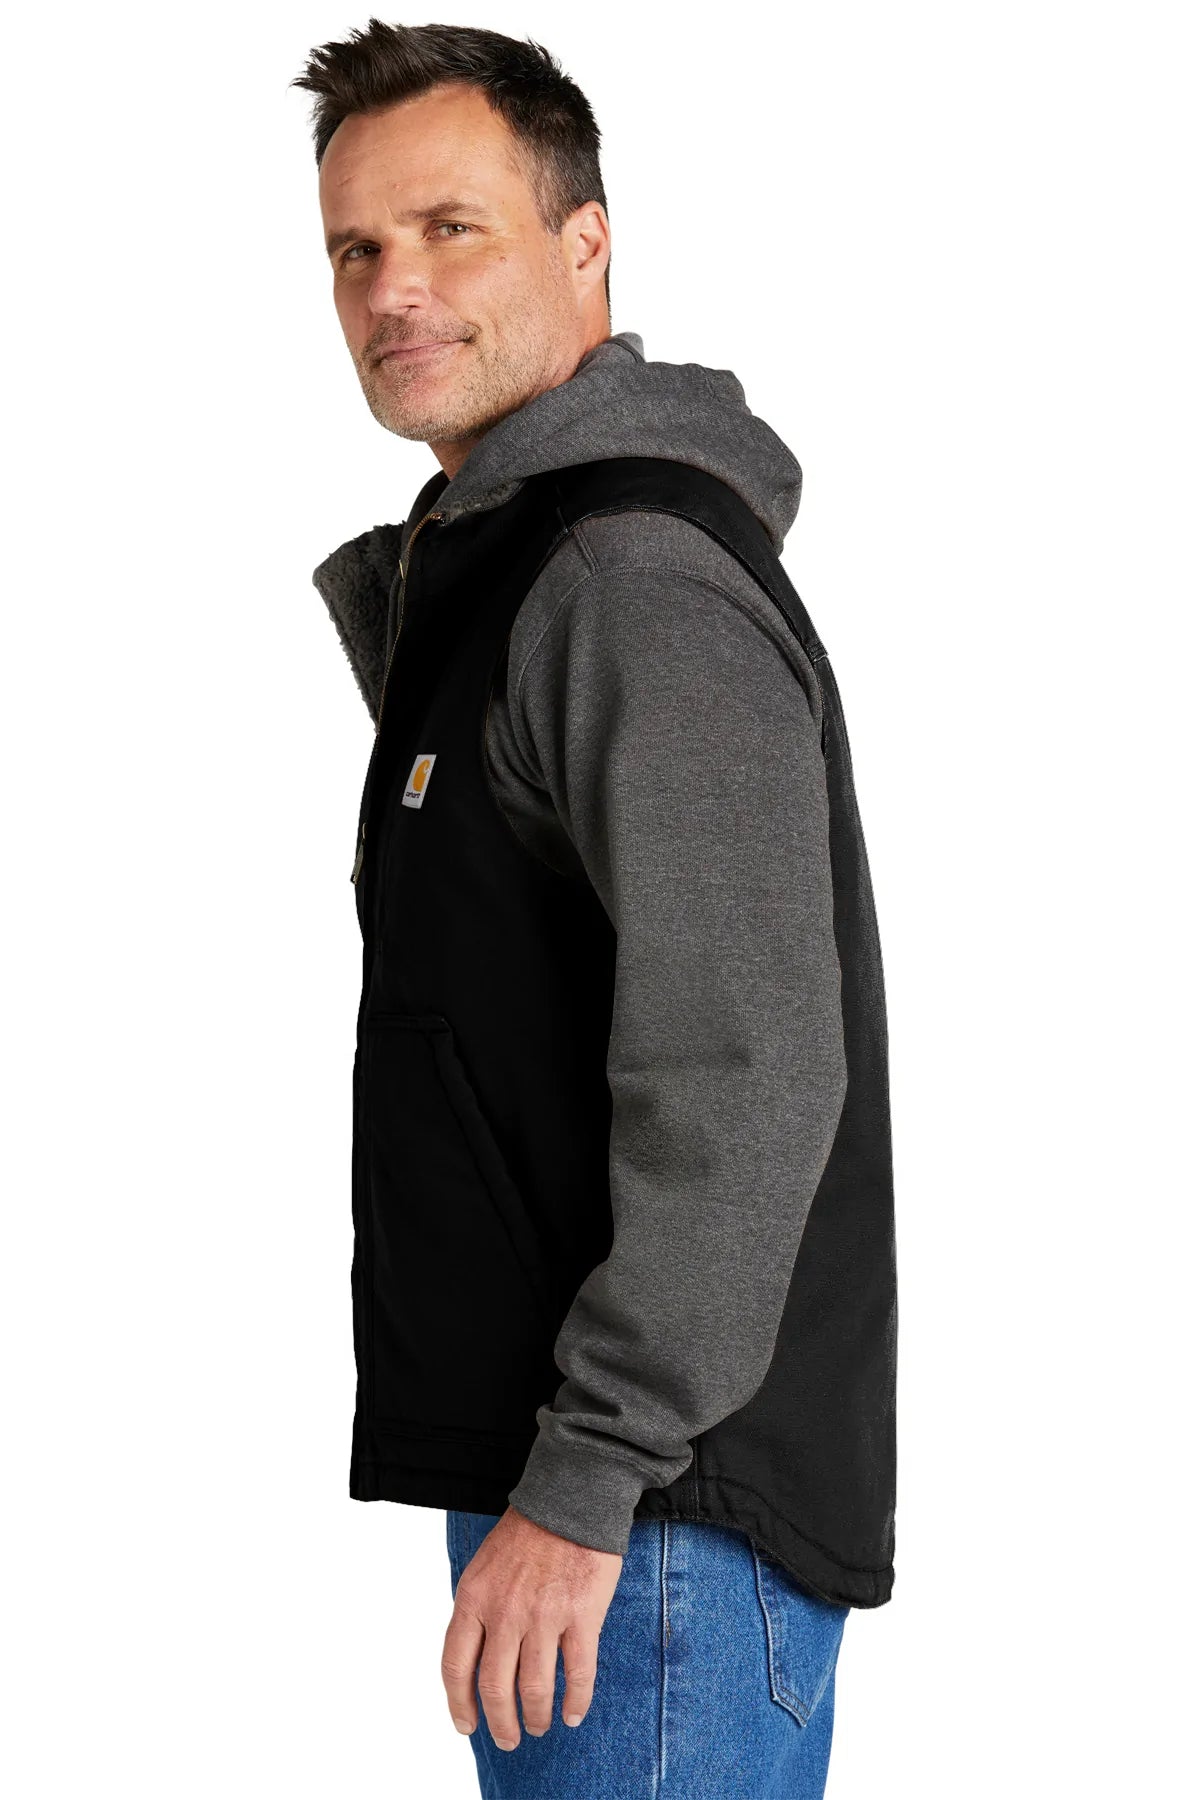 Carhartt Sherpa-Lined Customized Vests, Black